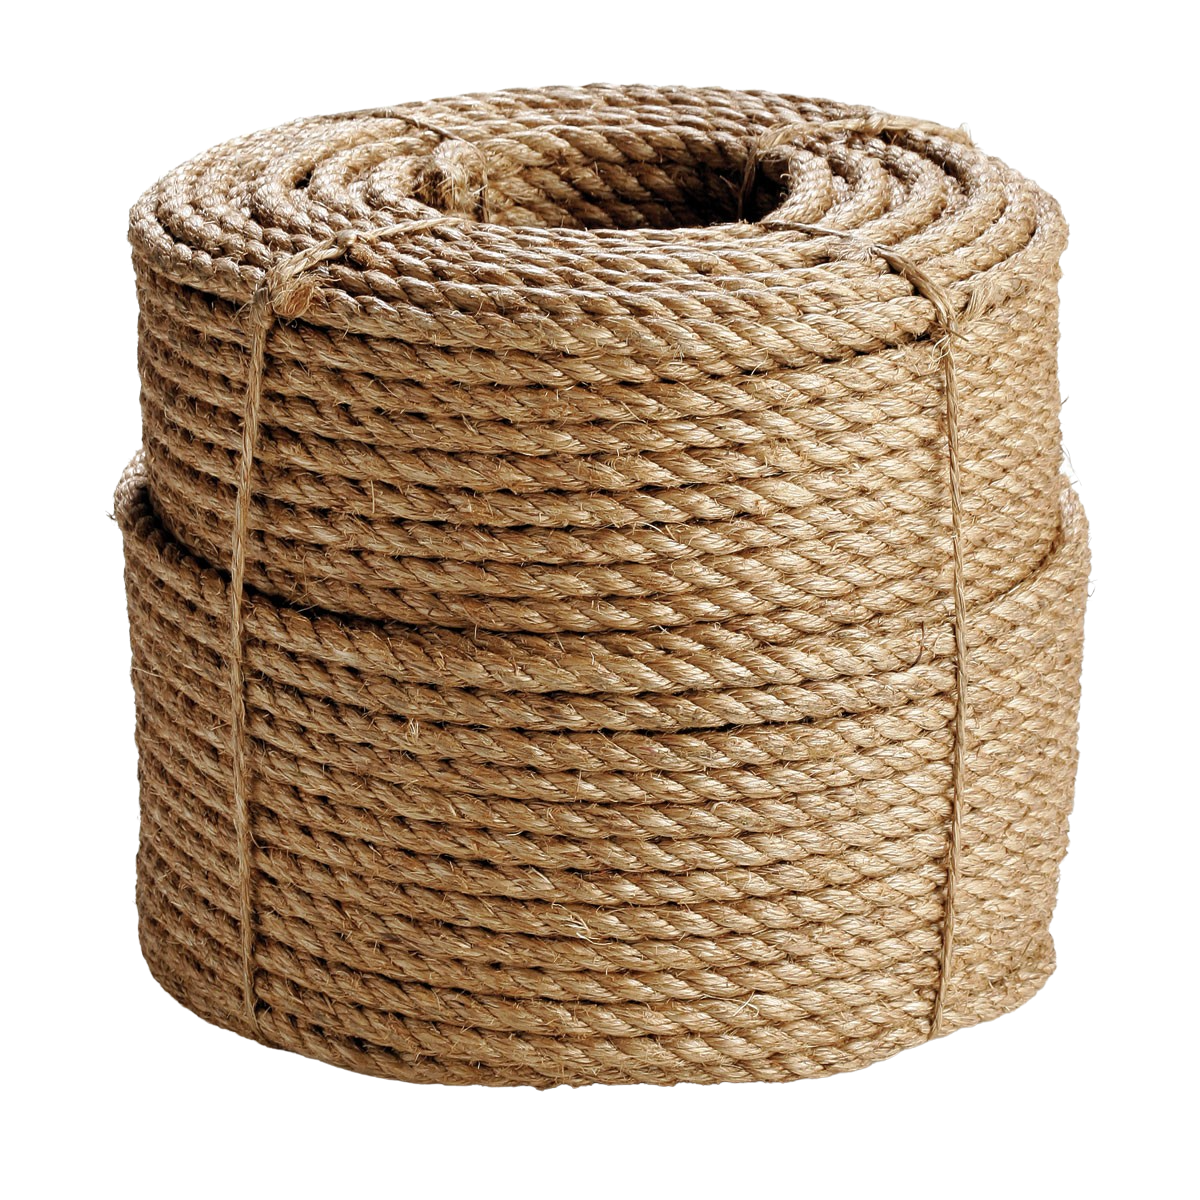 1 4 inch x 5000 ft. Yellow Polypropylene Rope, from Erin Rope Corp.